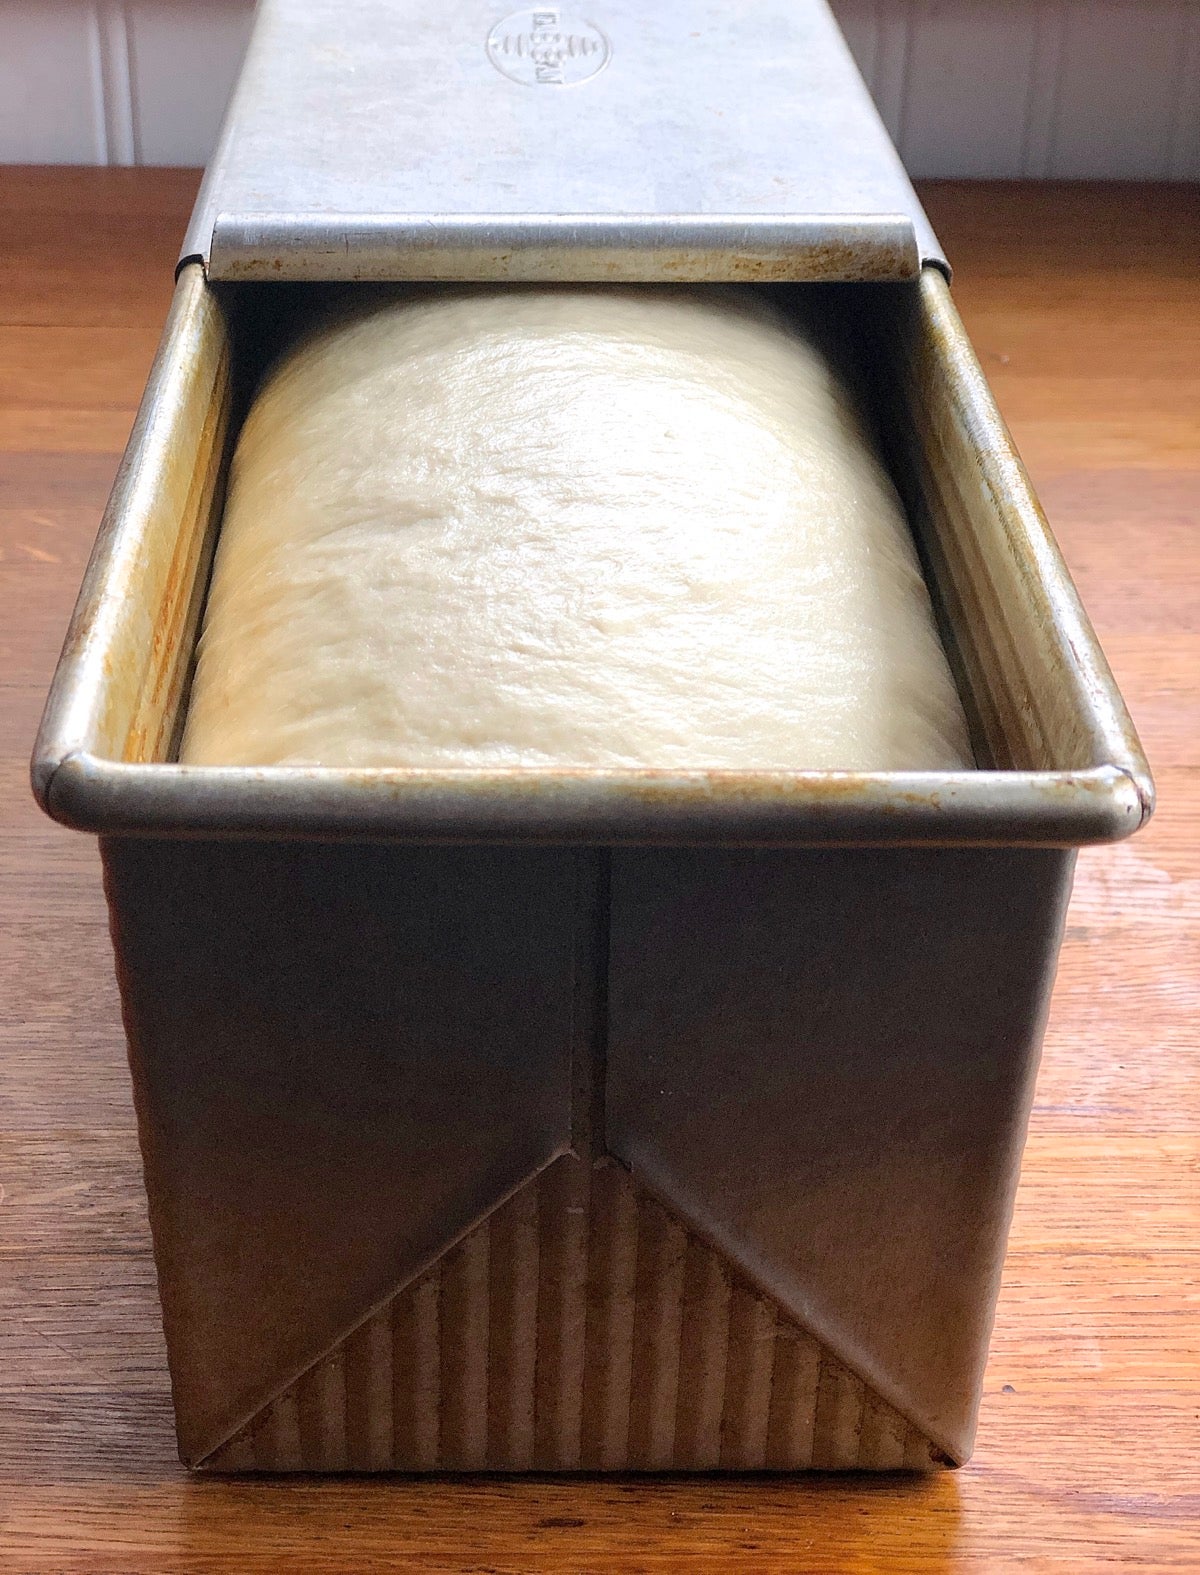 Risen dough in a loaf pan, ready to bake.